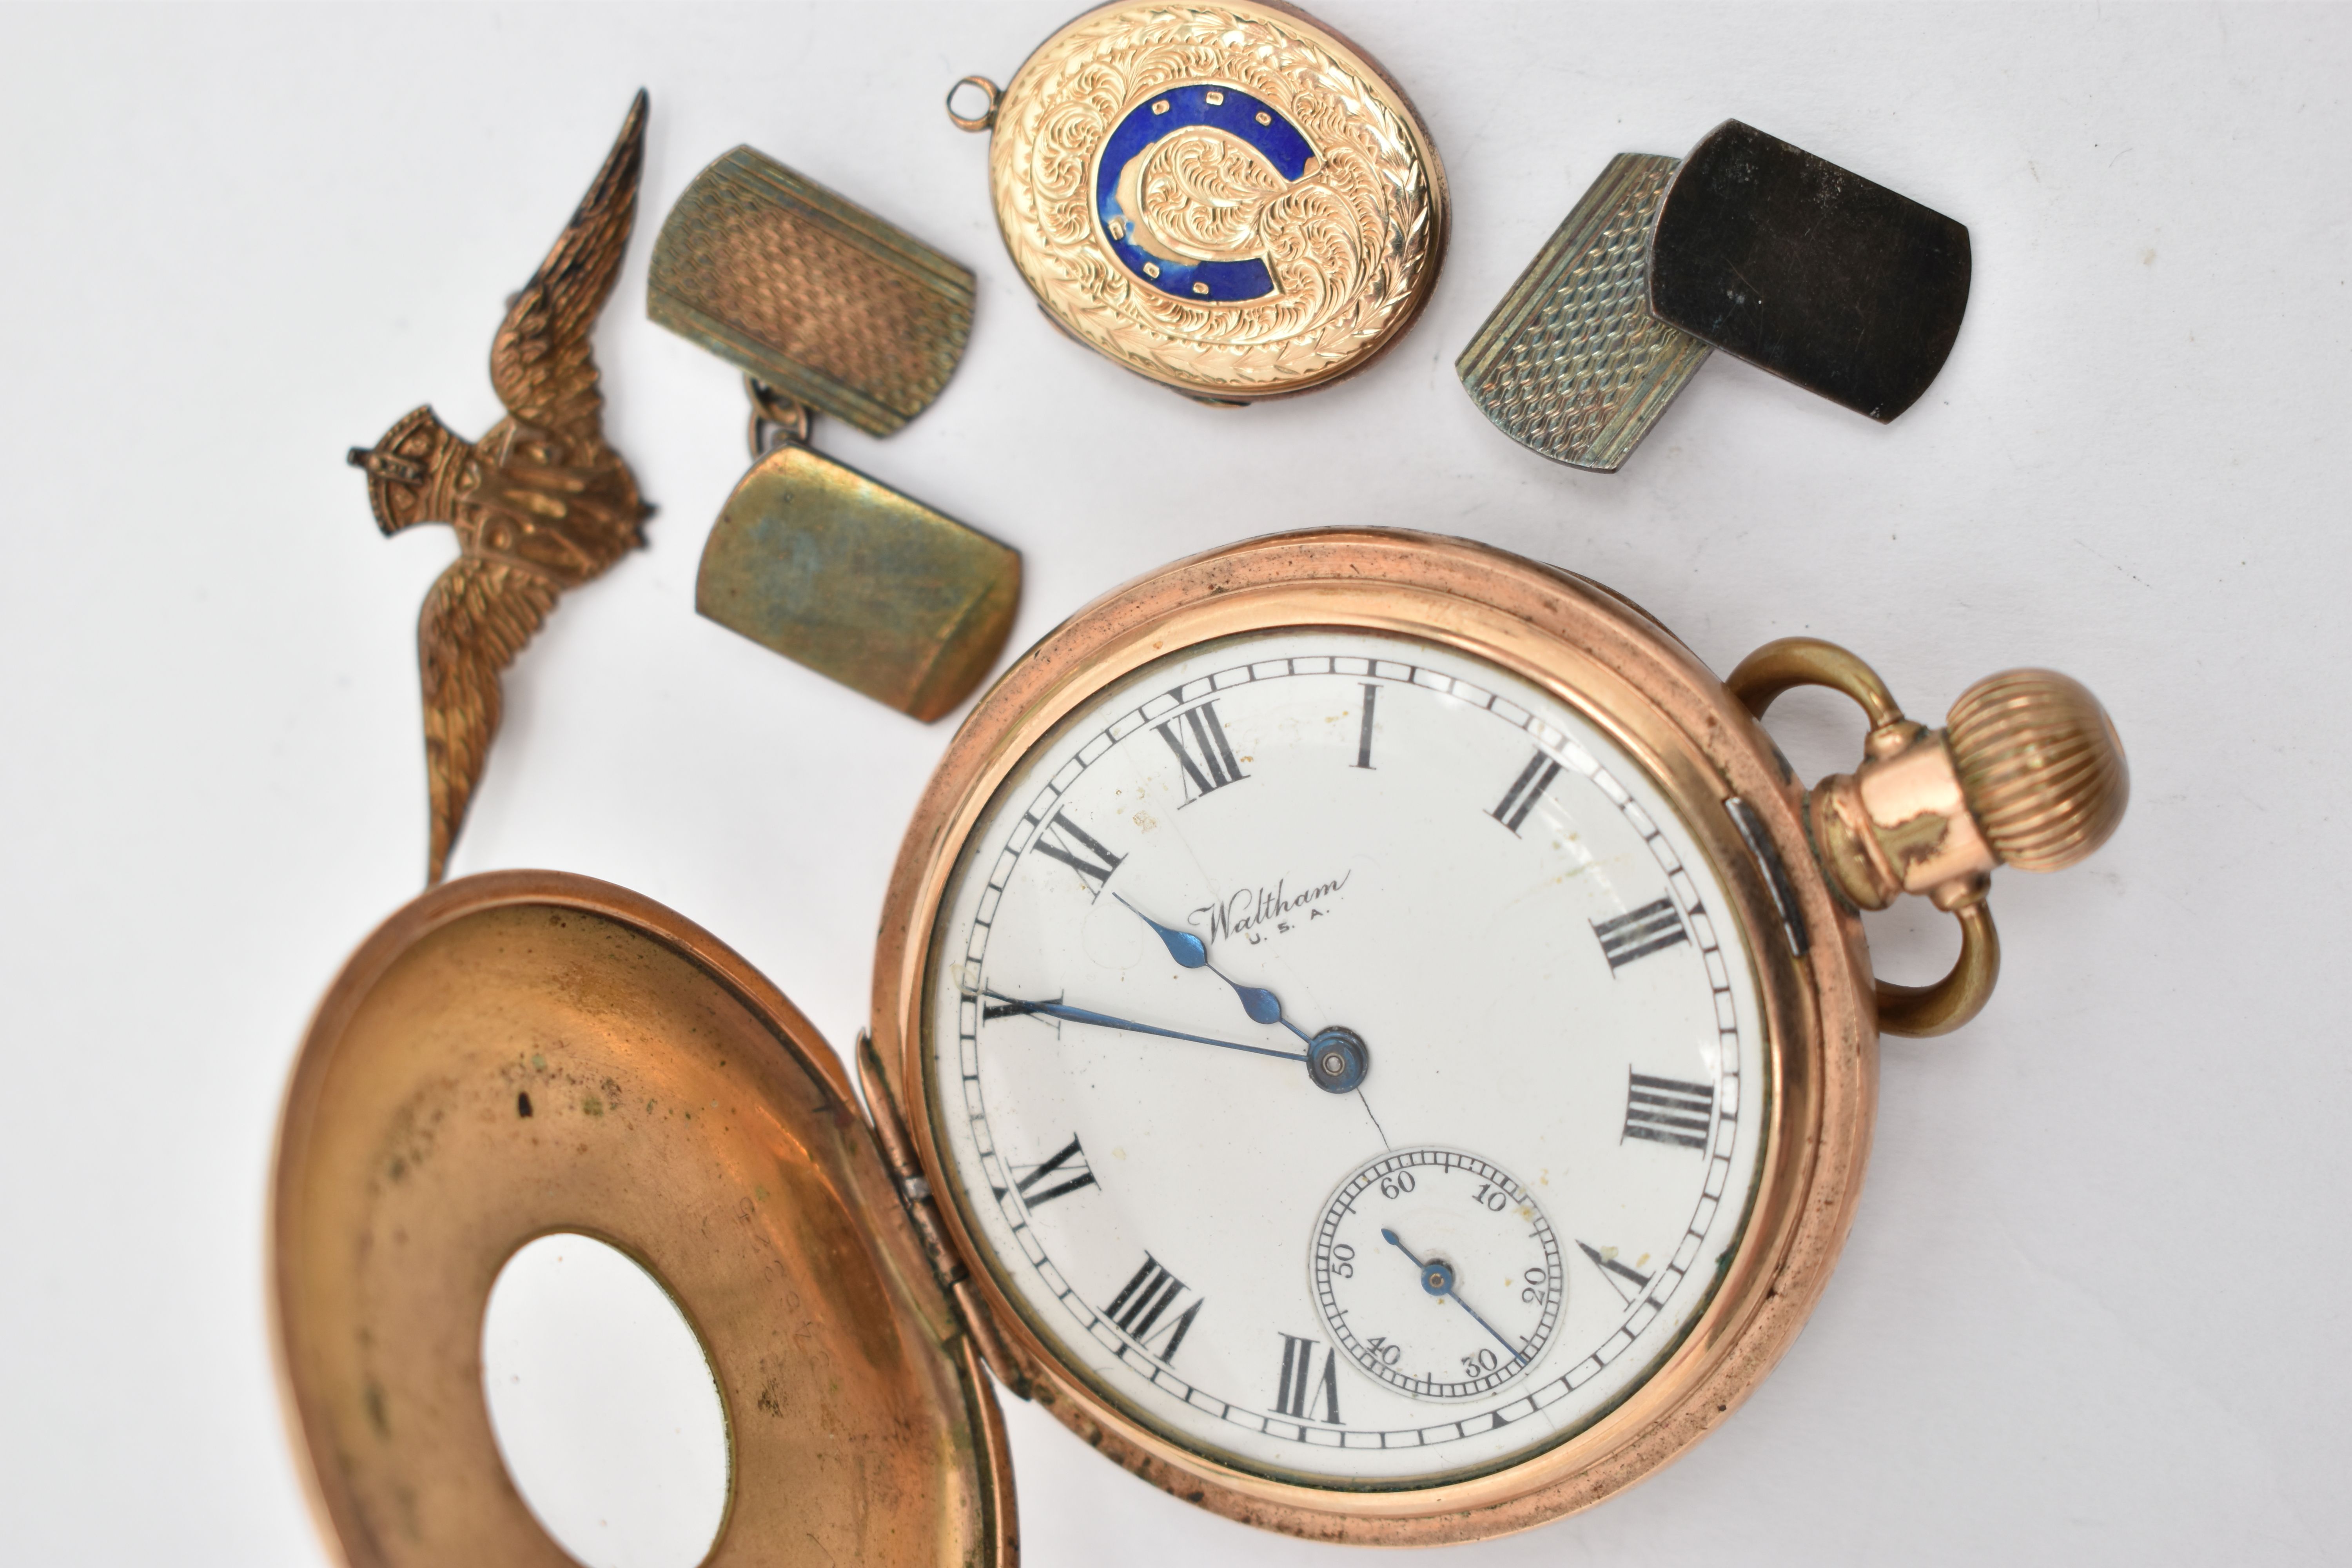 A GOLD PLATED 'WALTHAM' POCKET WATCH AND OTHER ITEMS, manual wind half hunter pocket watch, round - Image 2 of 4